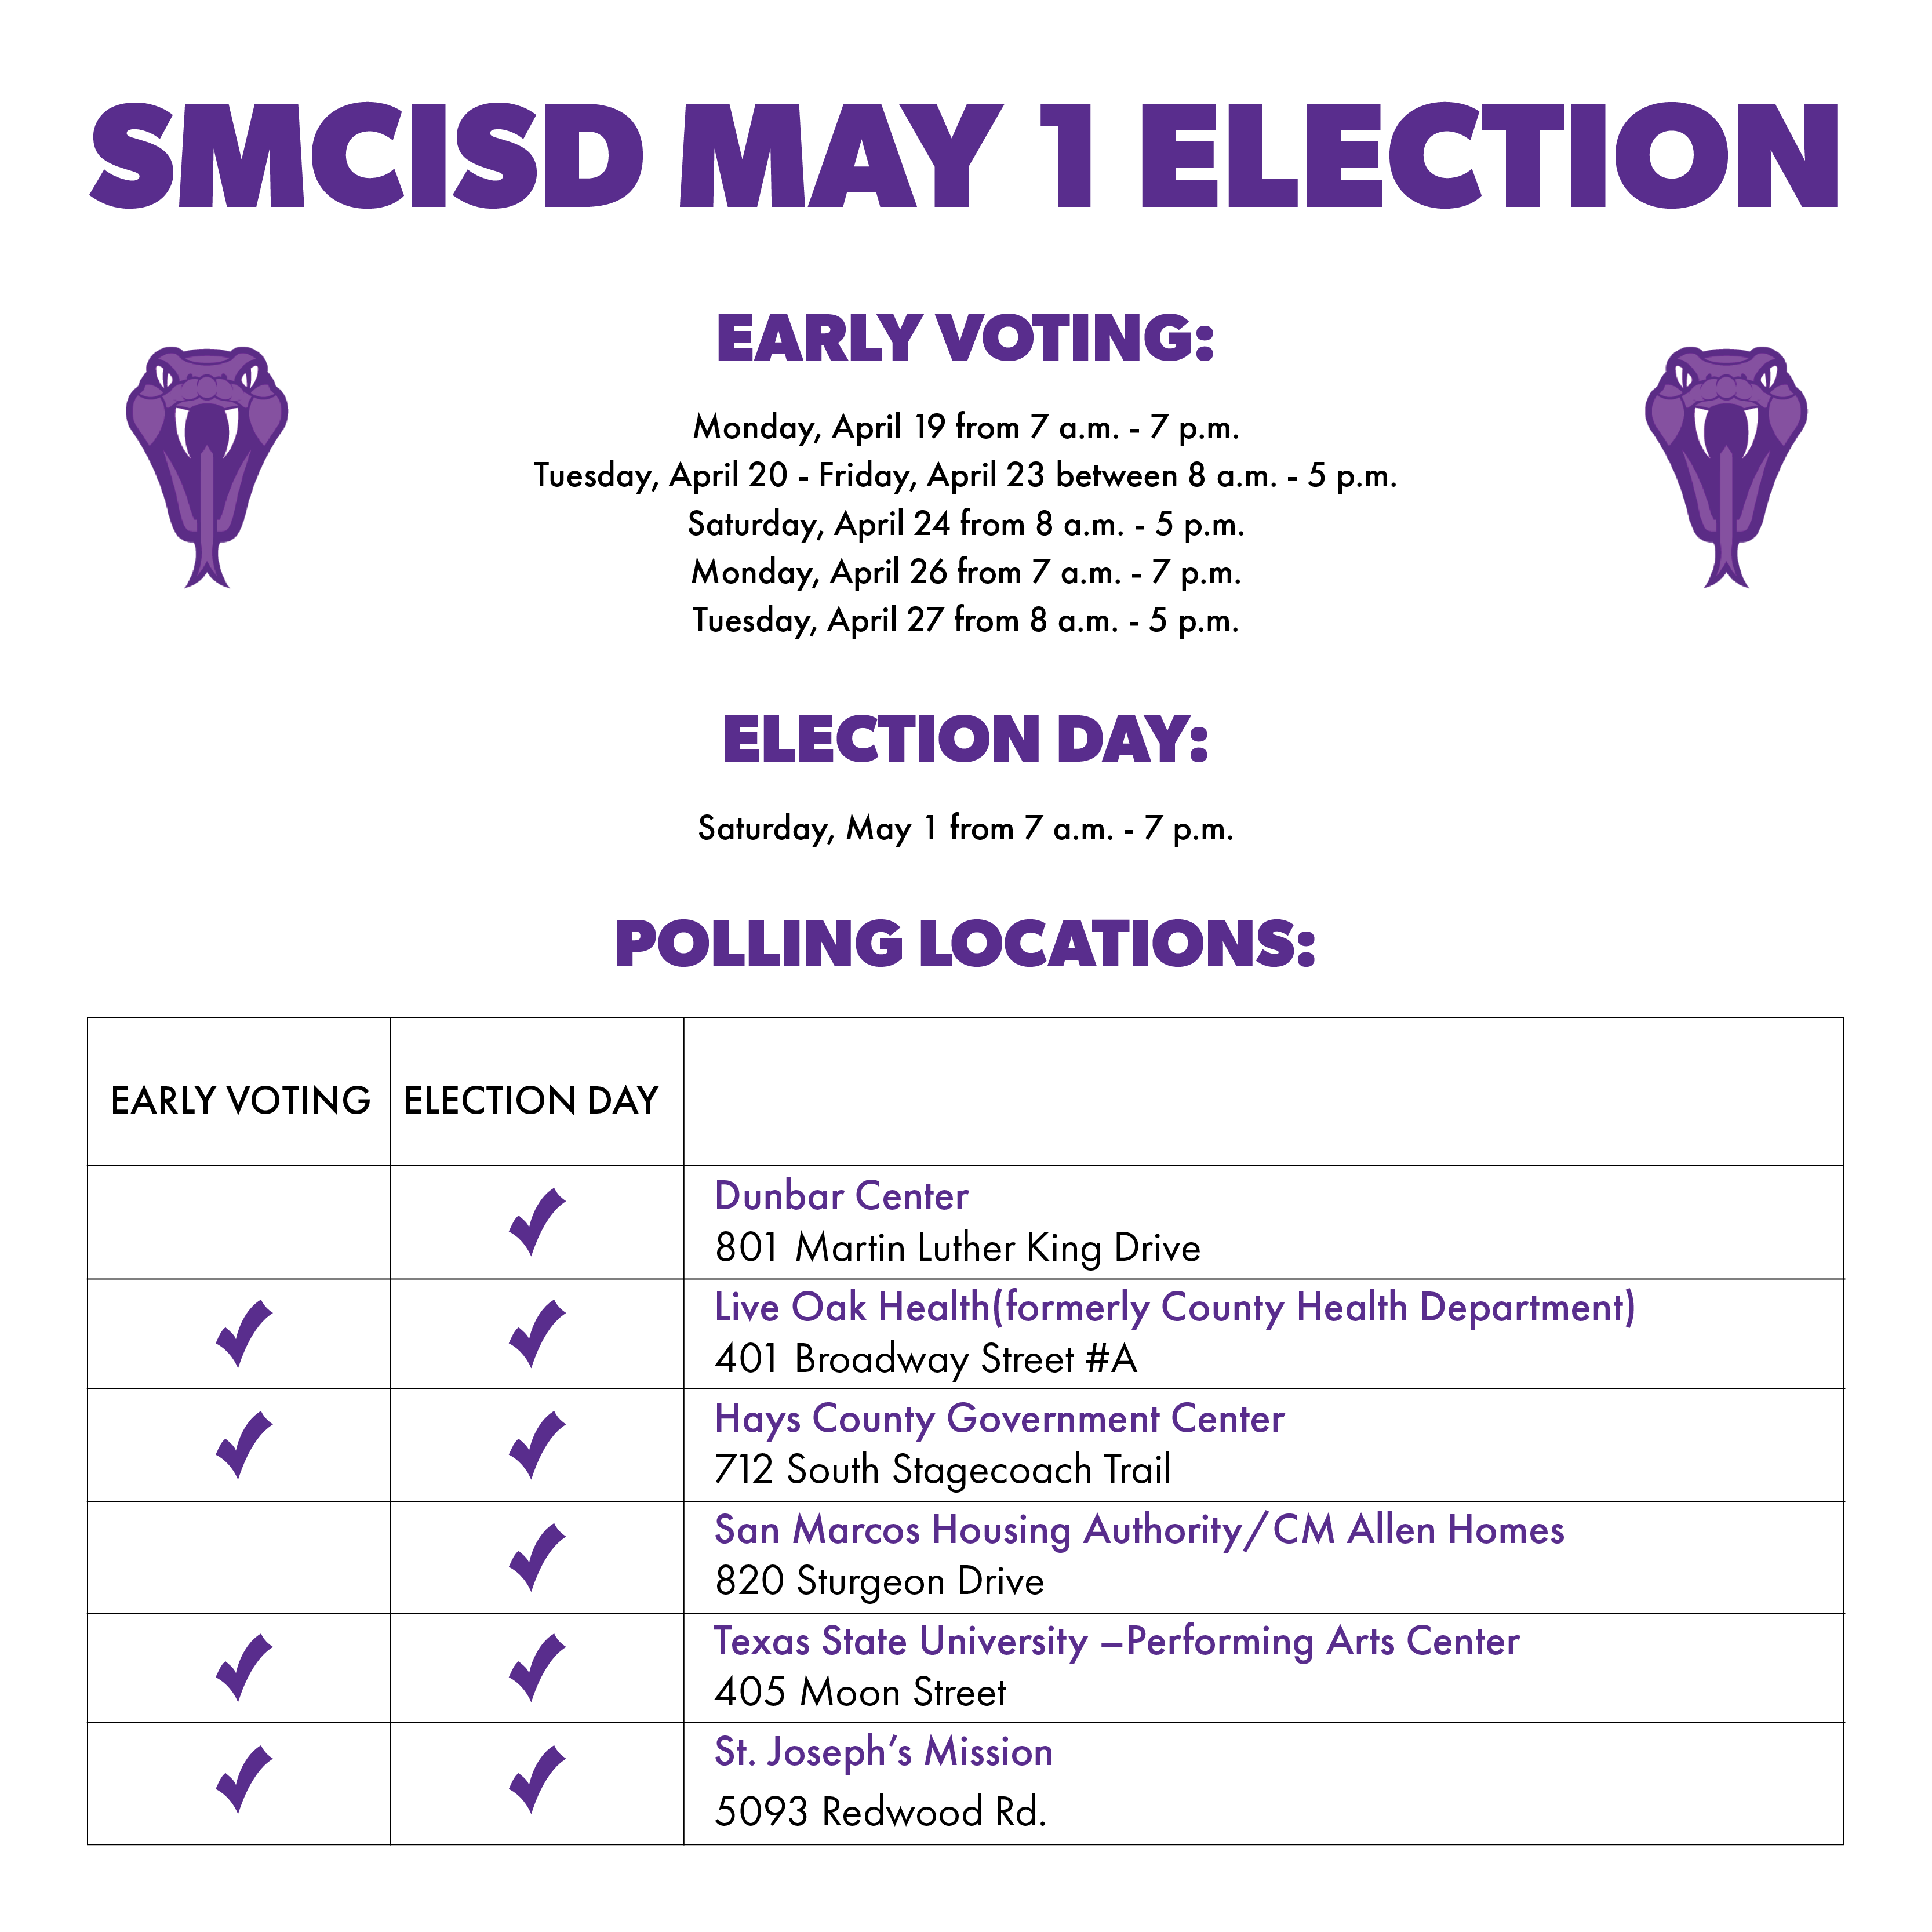 SMCISD board passes polling locations, voting hours for